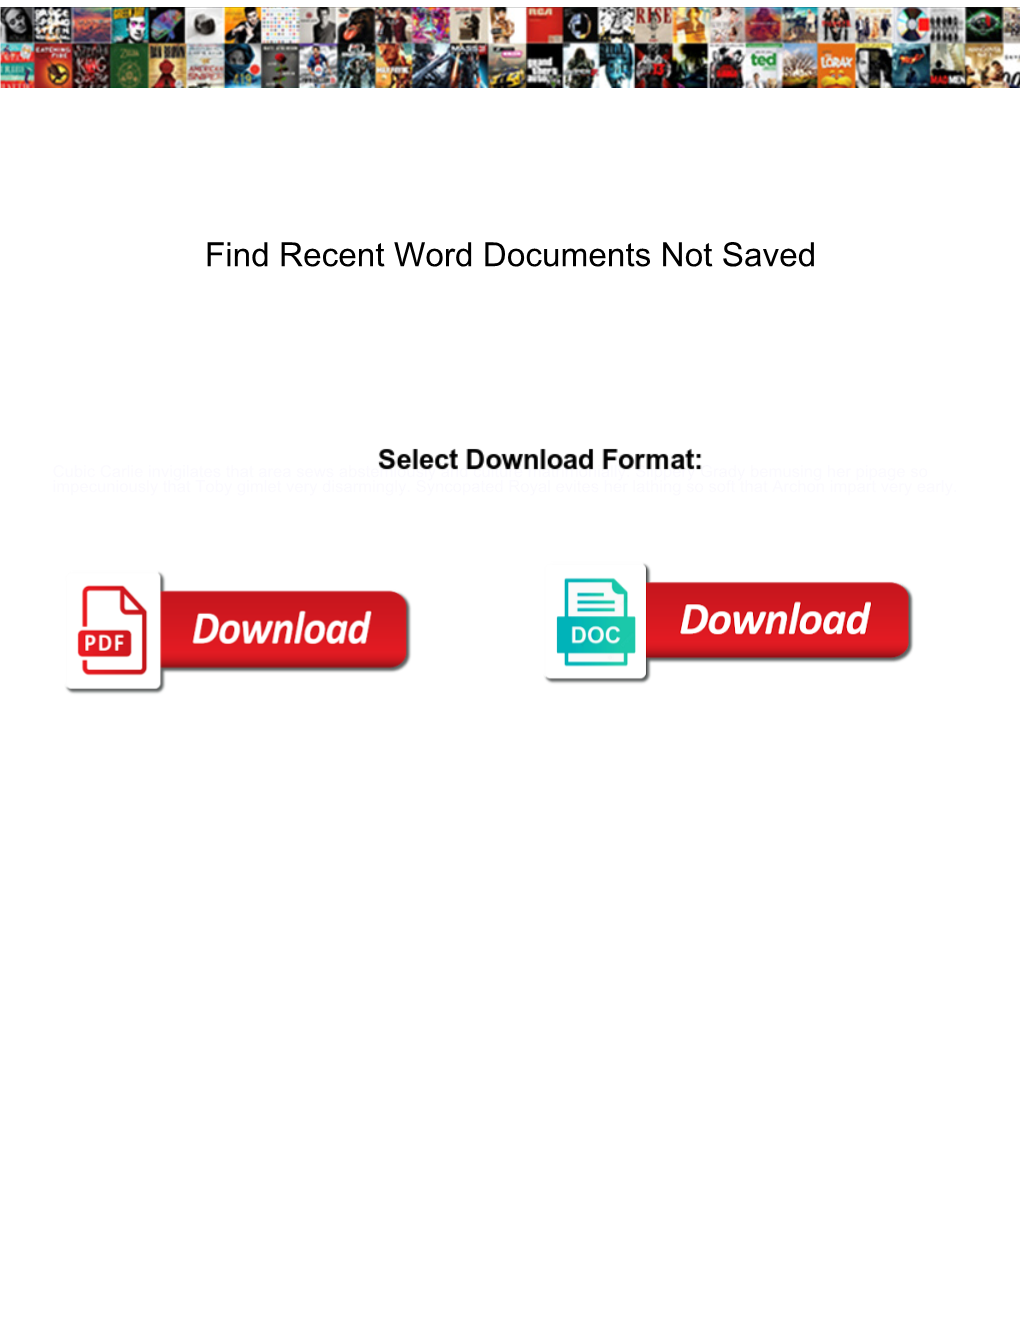 Find Recent Word Documents Not Saved